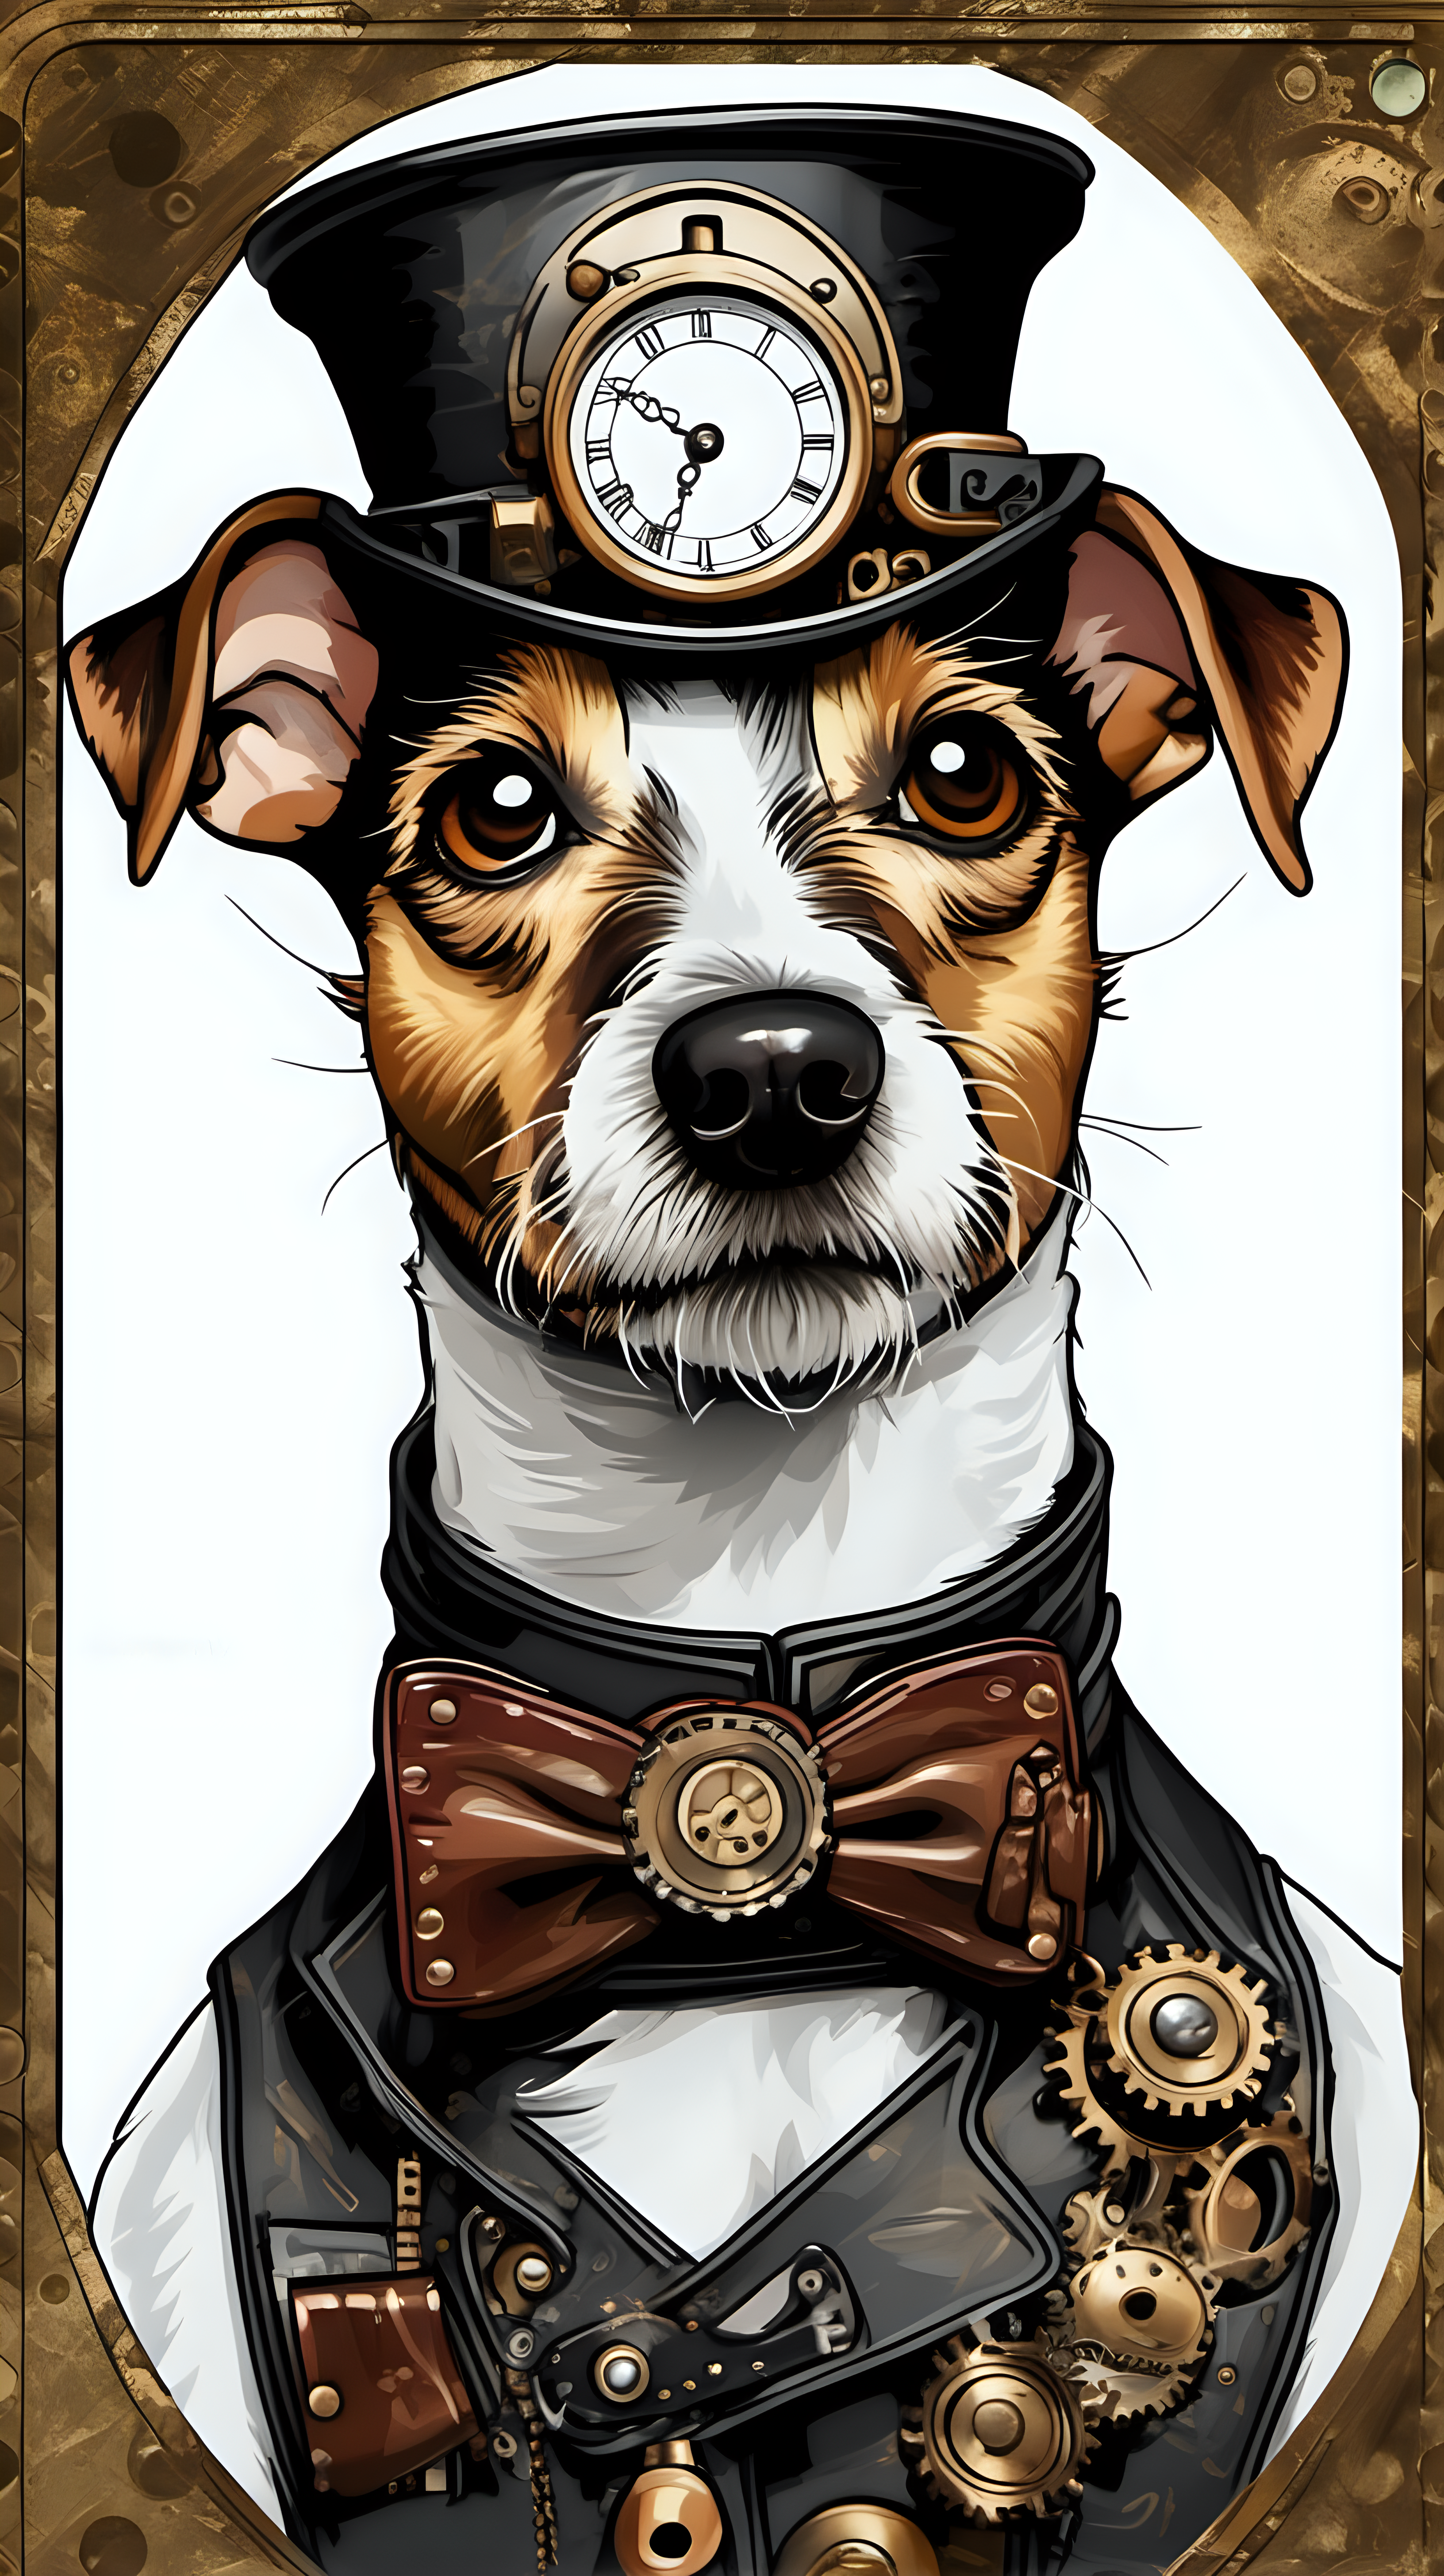 steam punk jack russell
portrait with border
